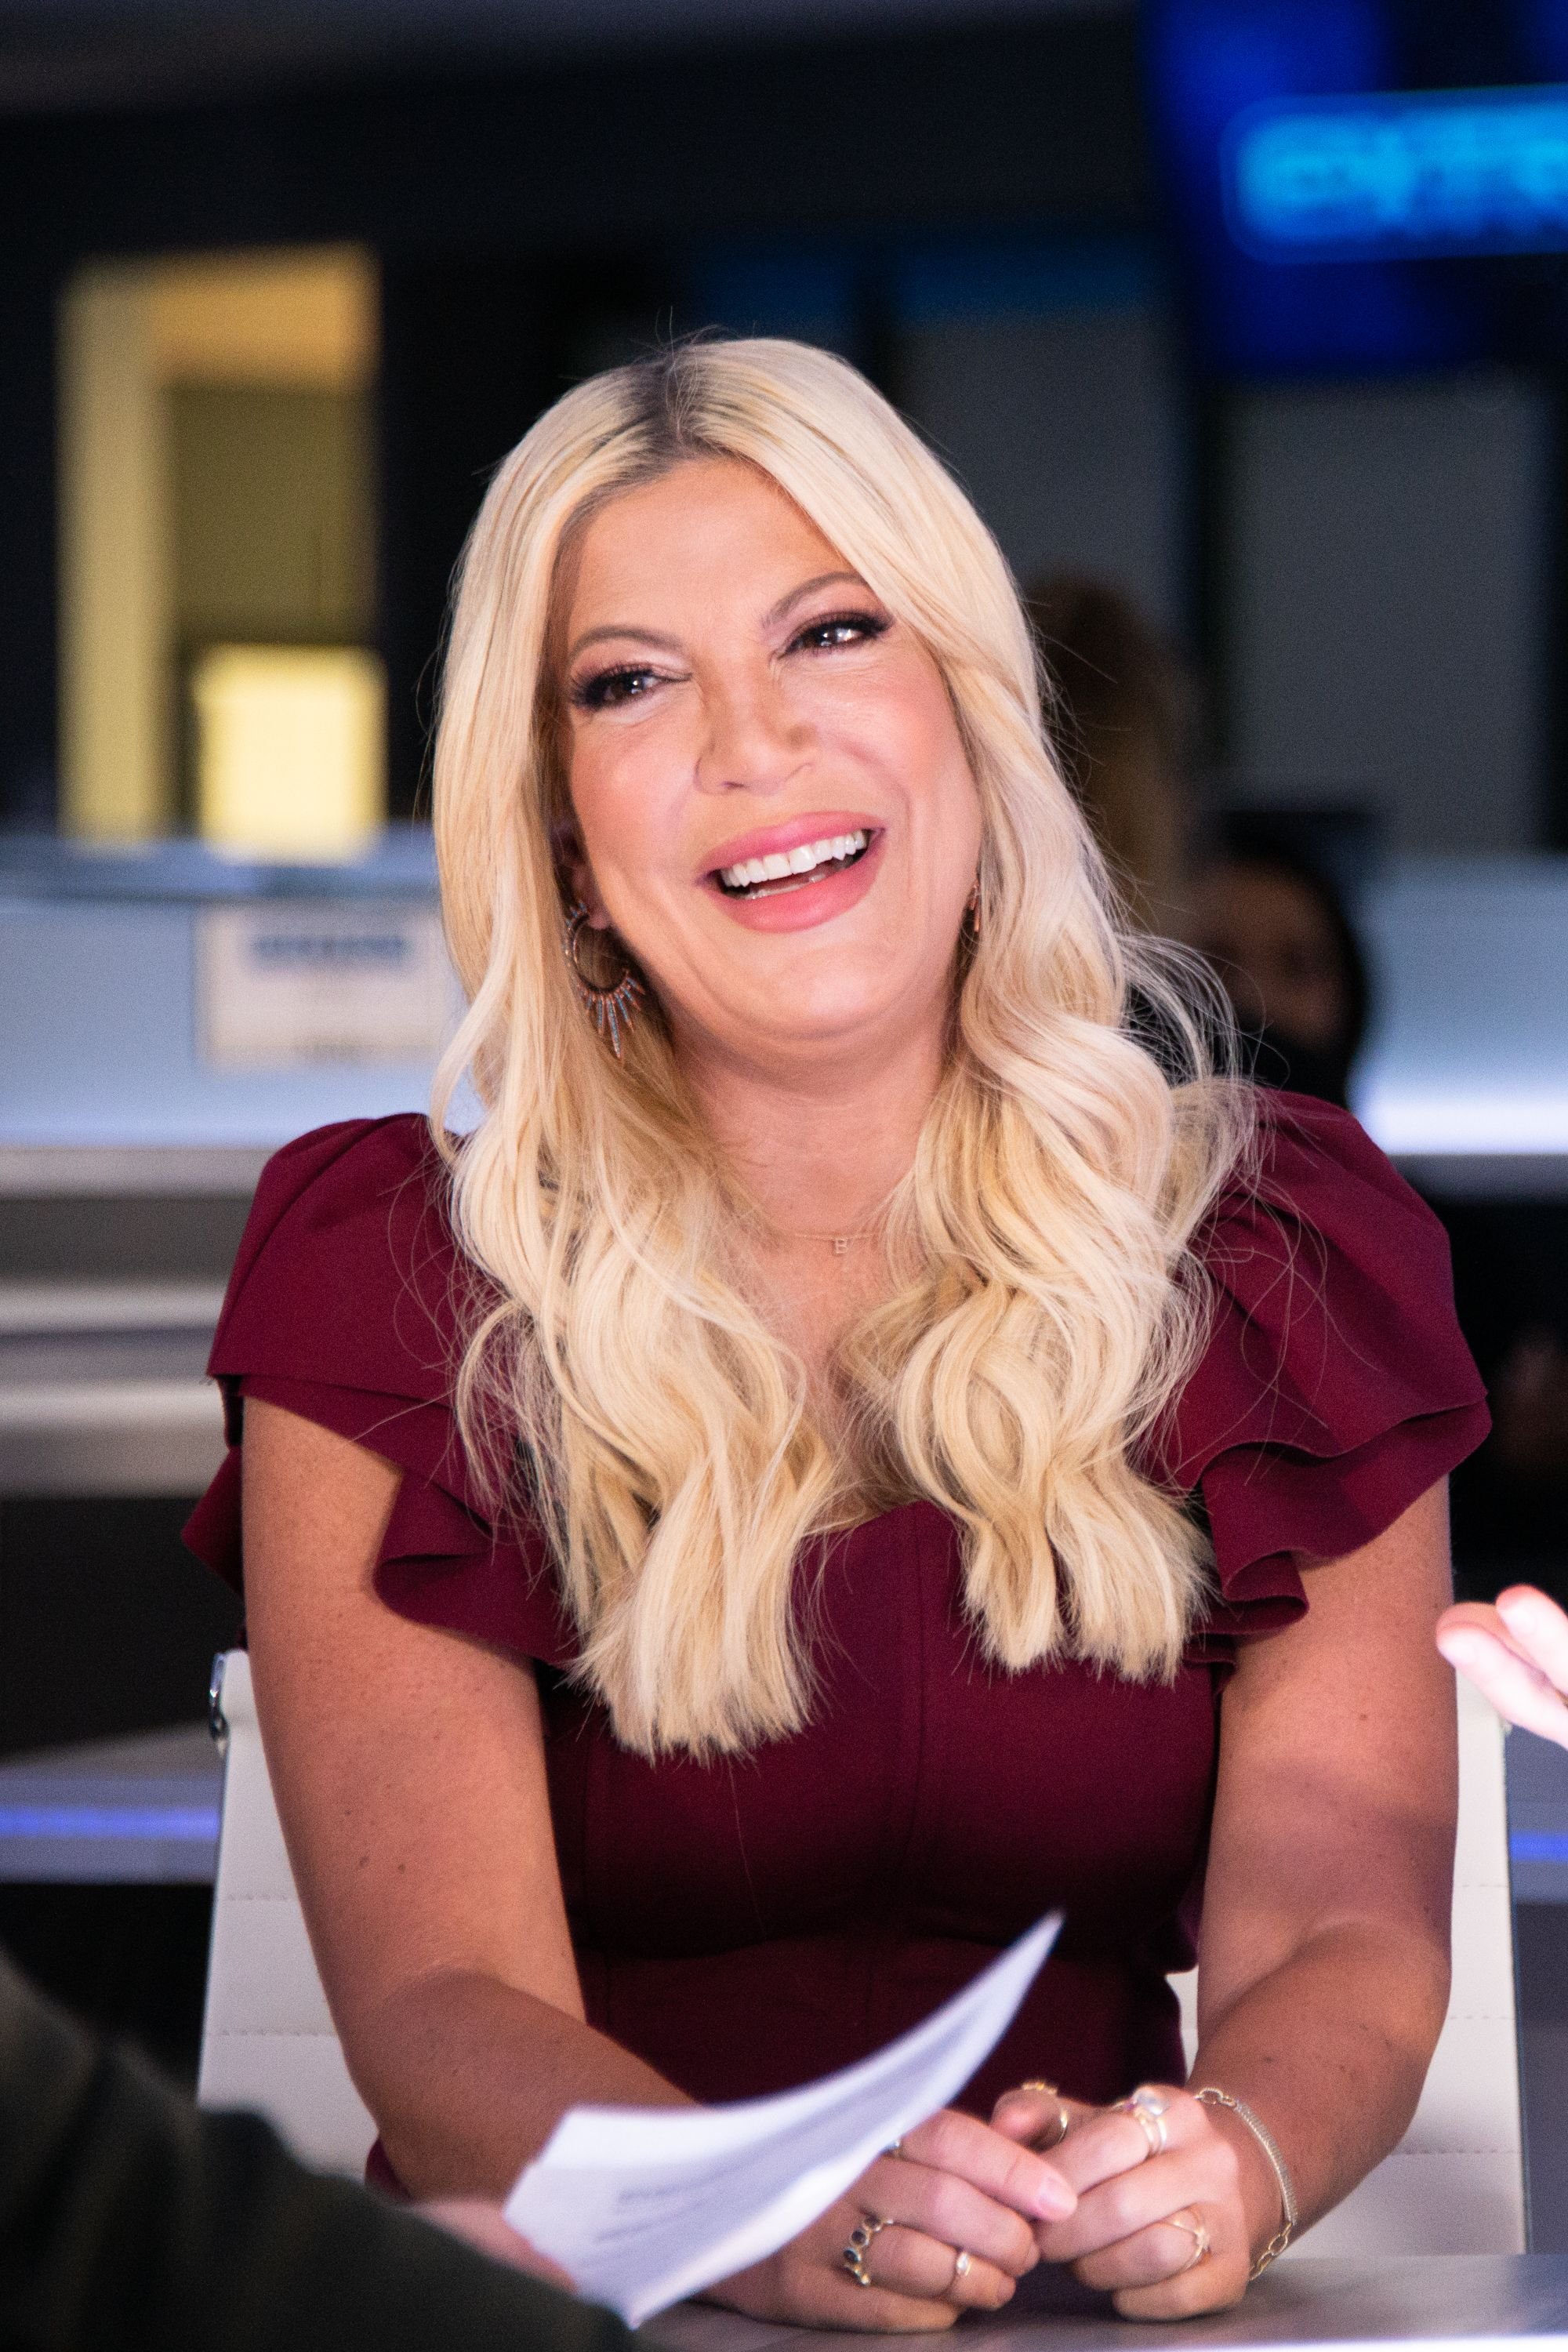 Tori Spelling visits "Extra" at Burbank Studios on September 11, 2019 in Burbank, California | Photo: Getty Images